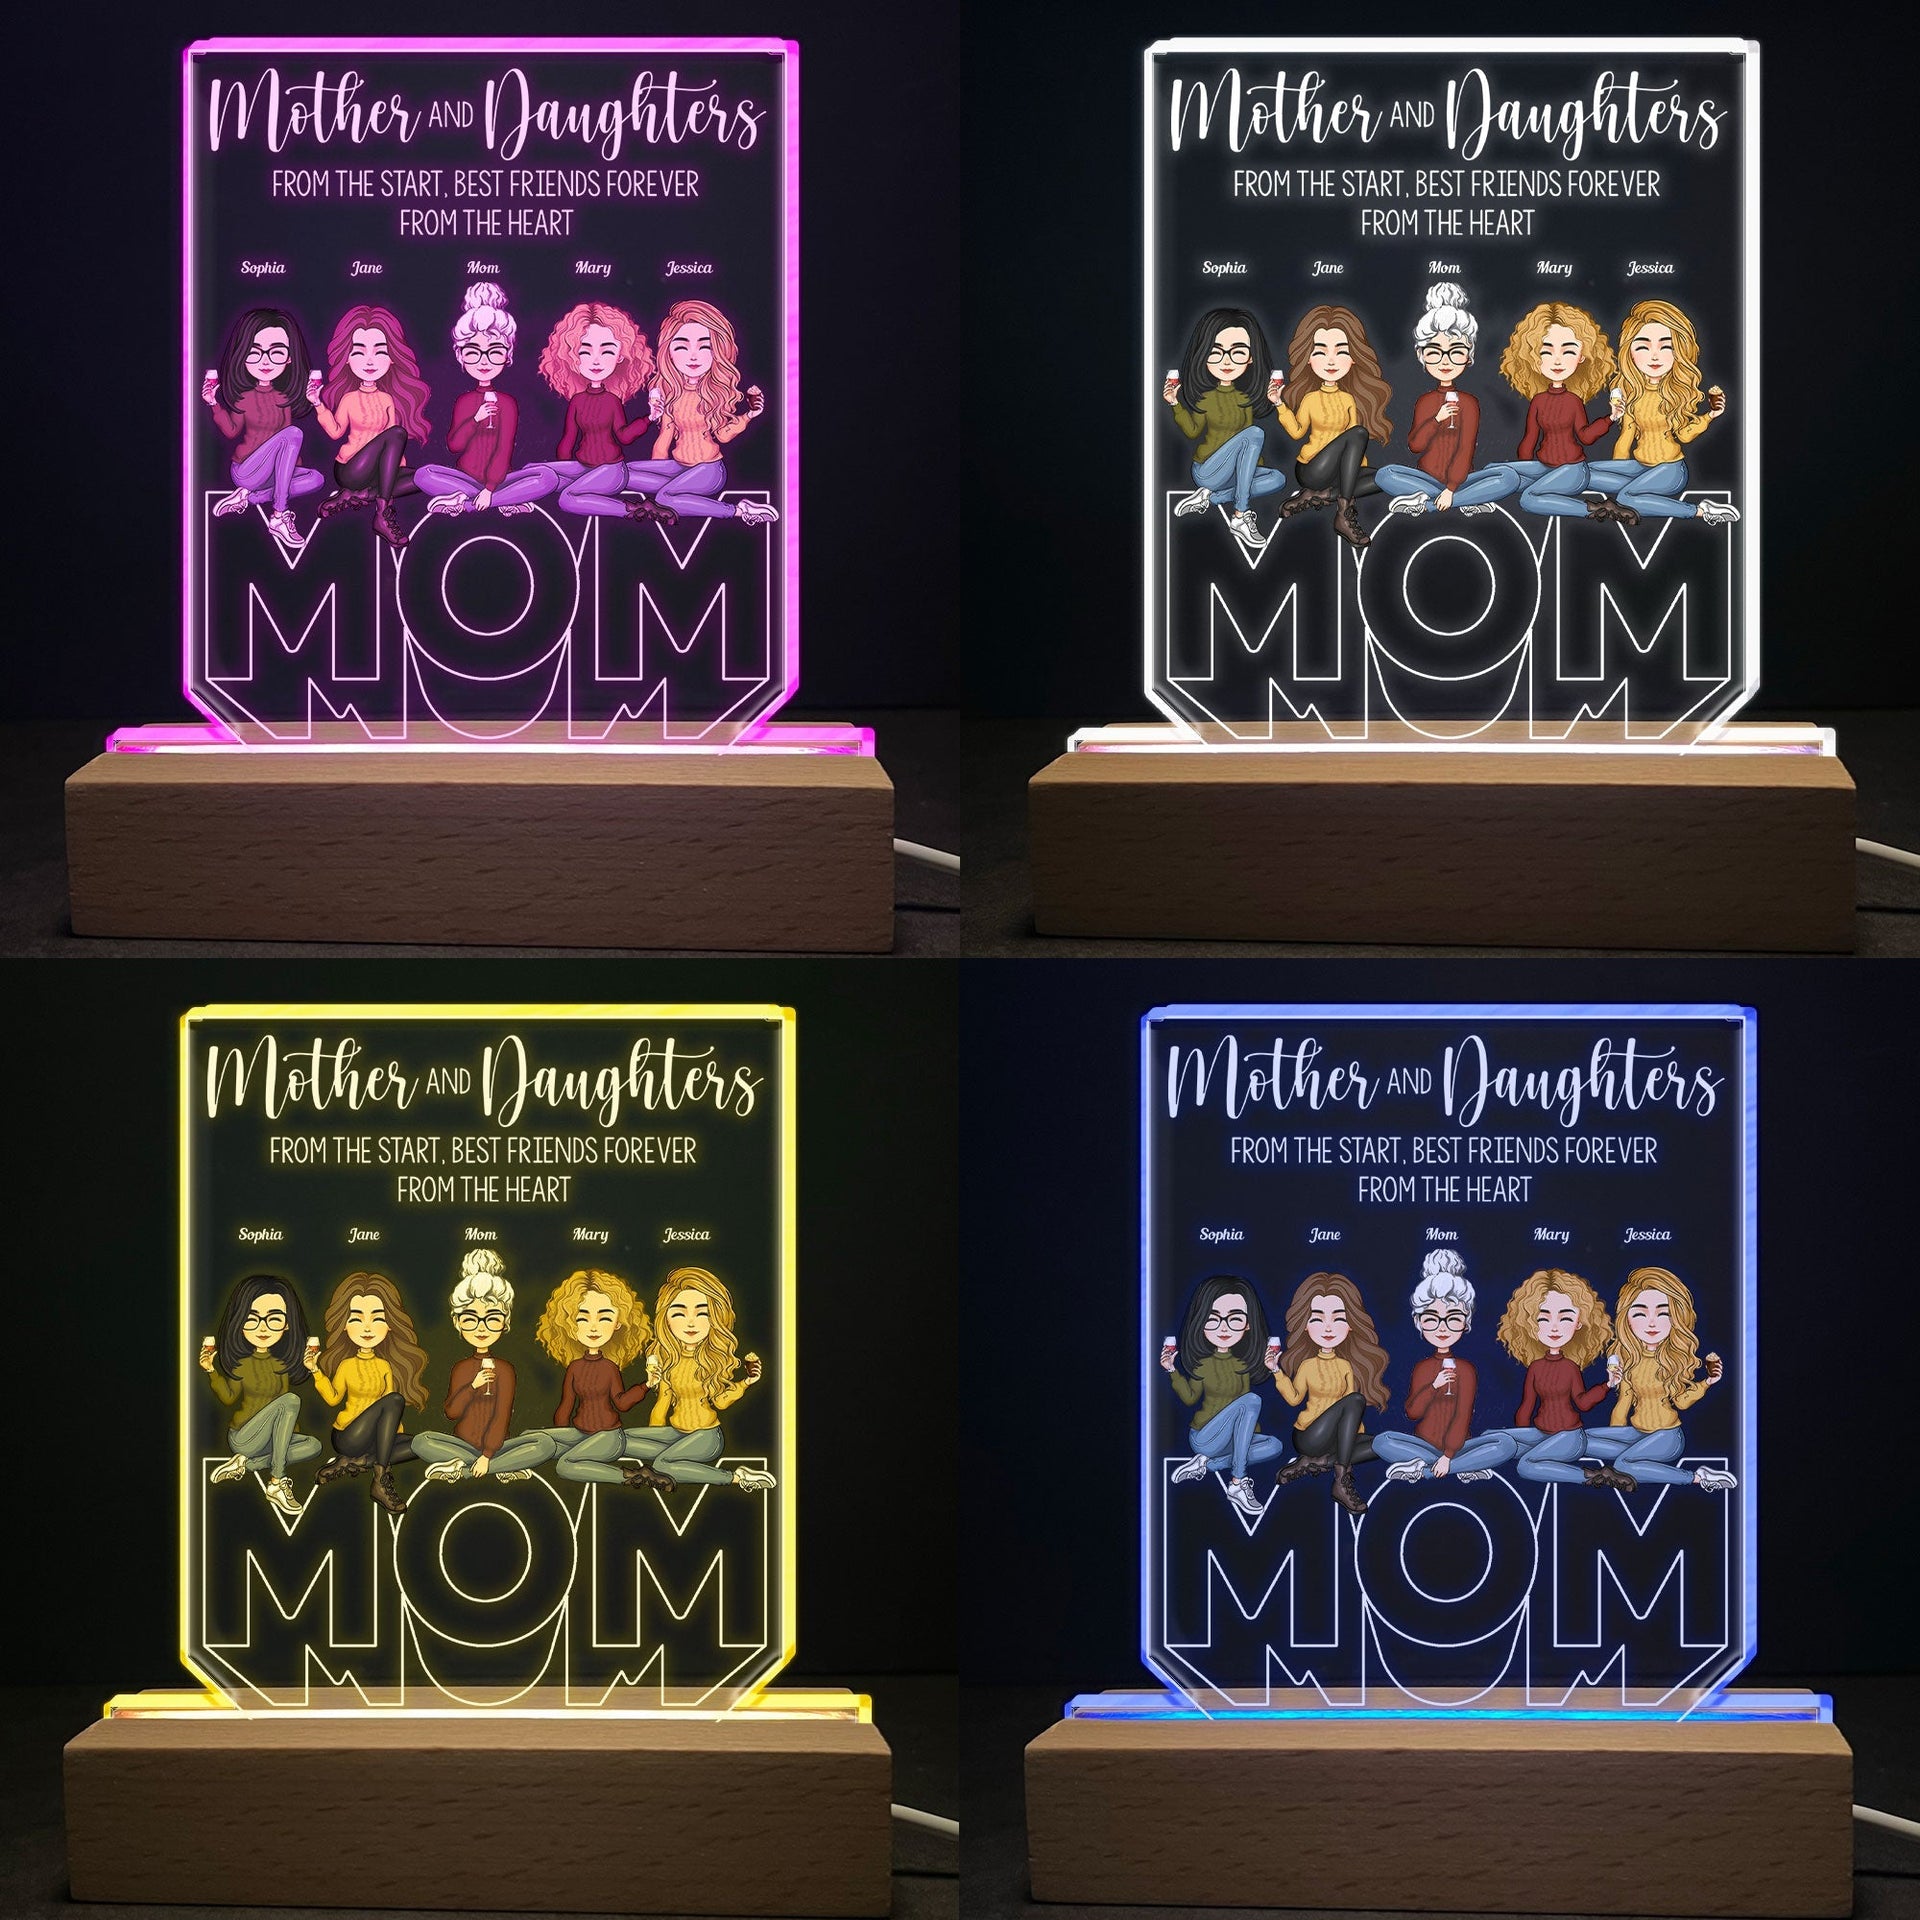 Mother And Children Best Friends Forever - Personalized Personalized 3D Led Light Wooden Base - Birthday Gift For Mom, Children, Sons, Daughters